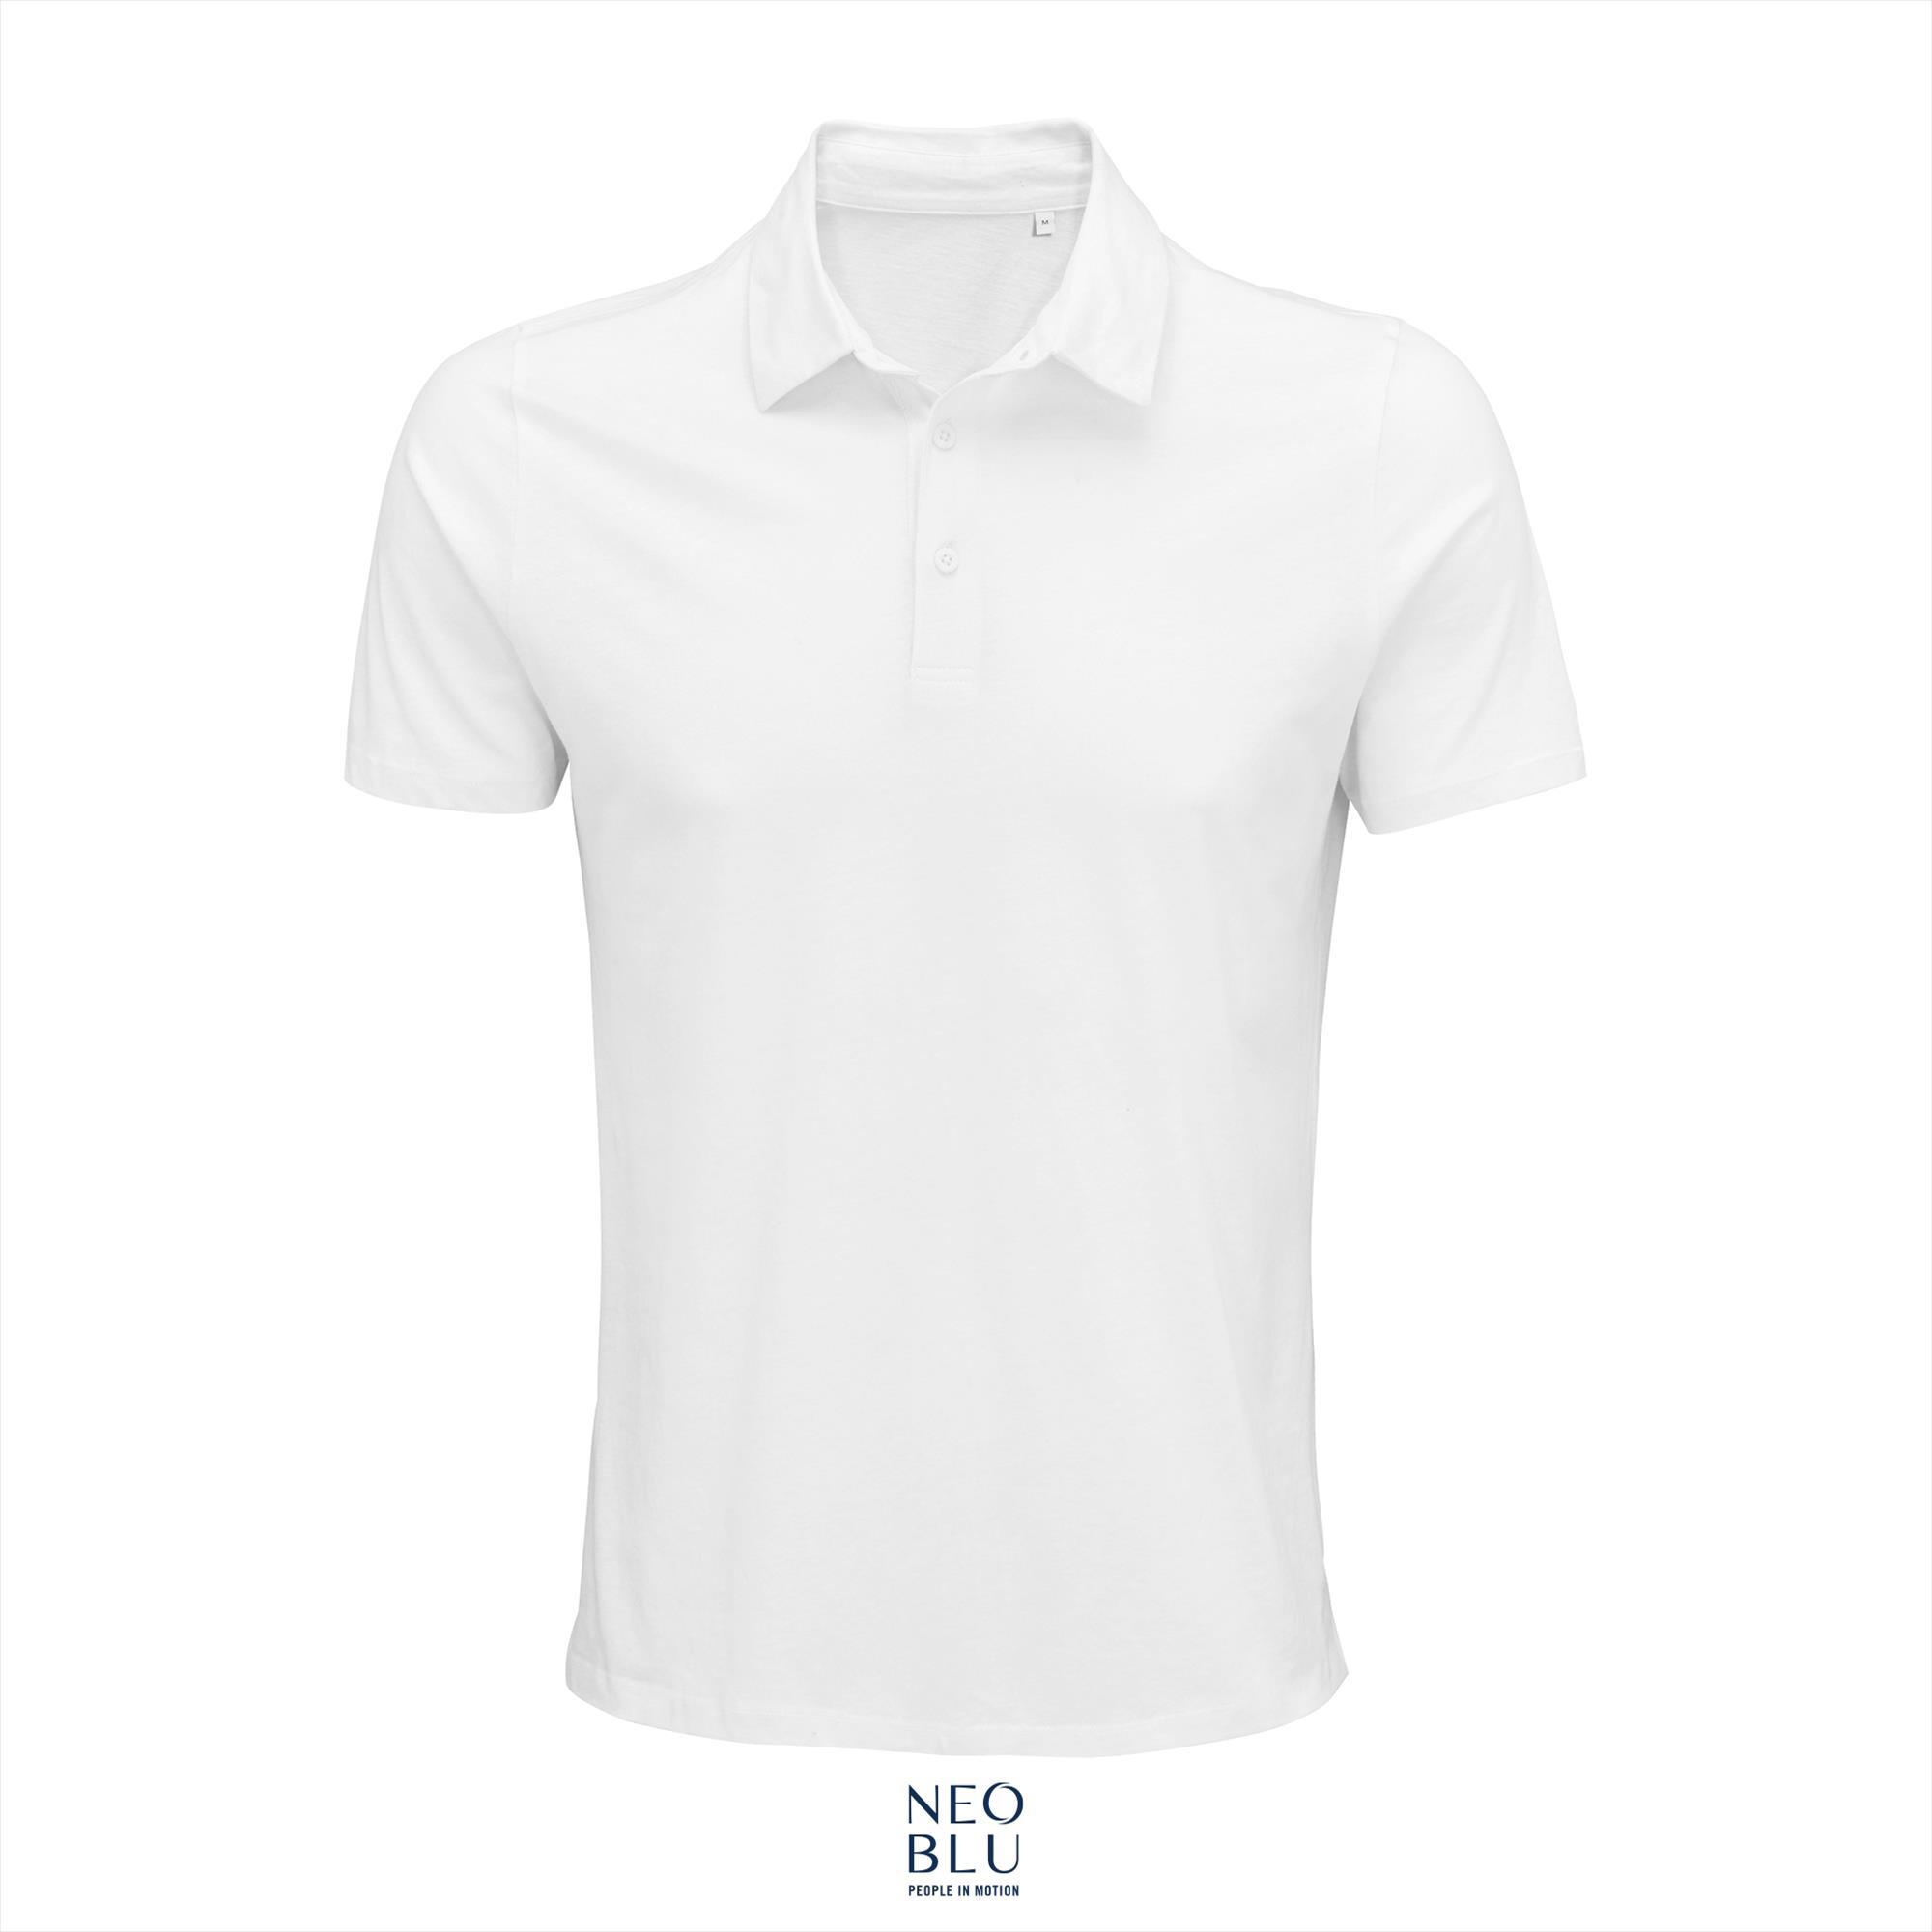 Poloshirt jersey voor mannen optic white polo